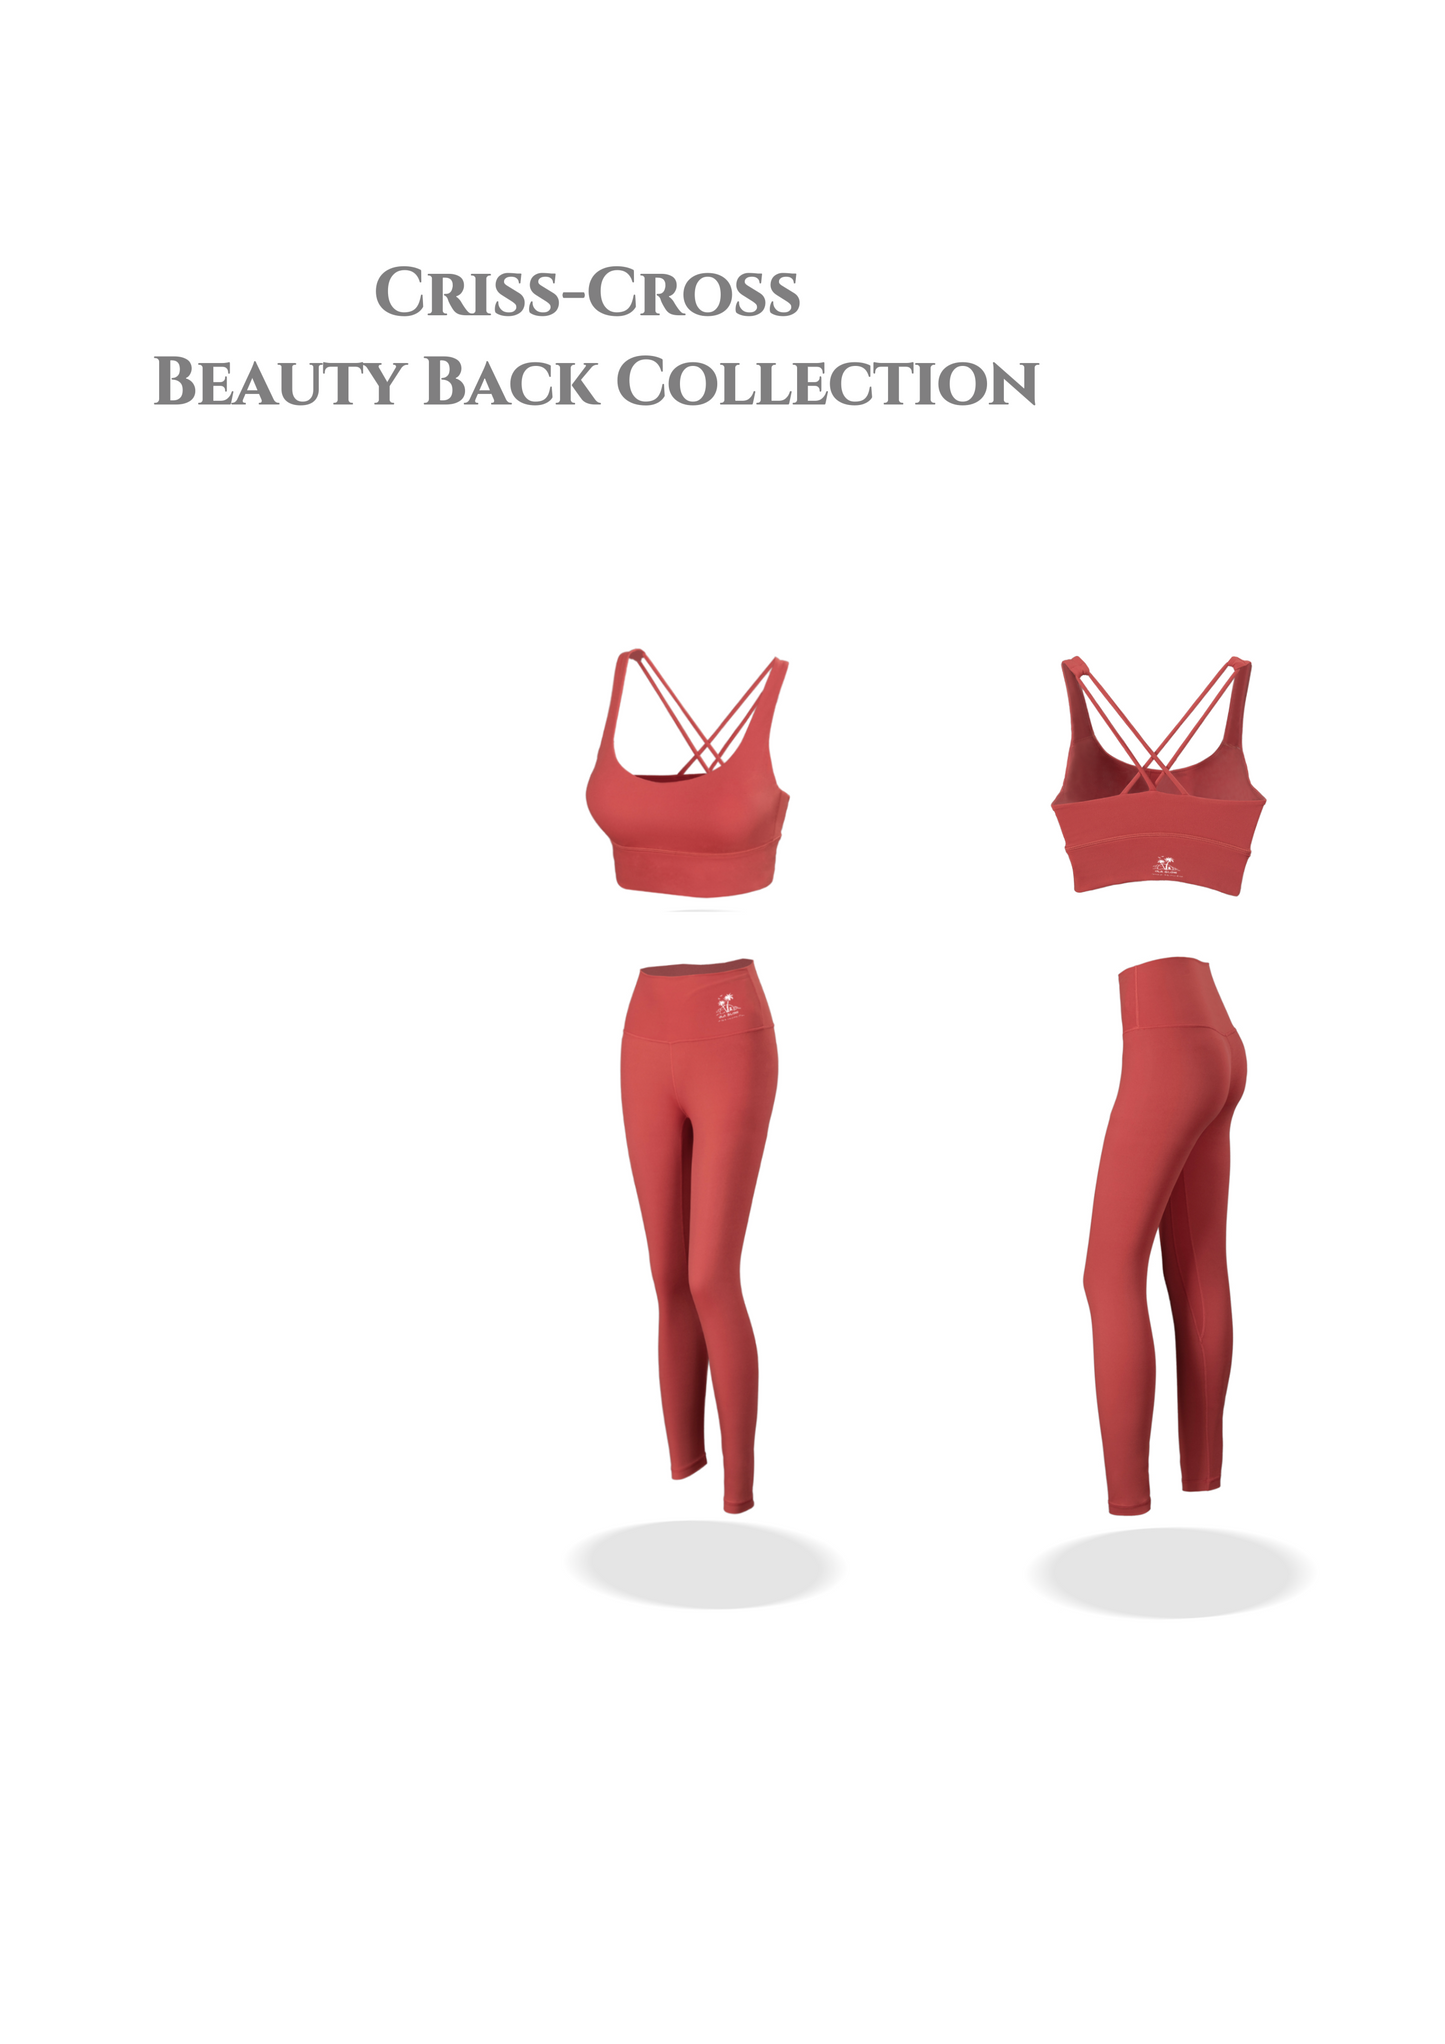 Criss-Cross Beauty Back Collection